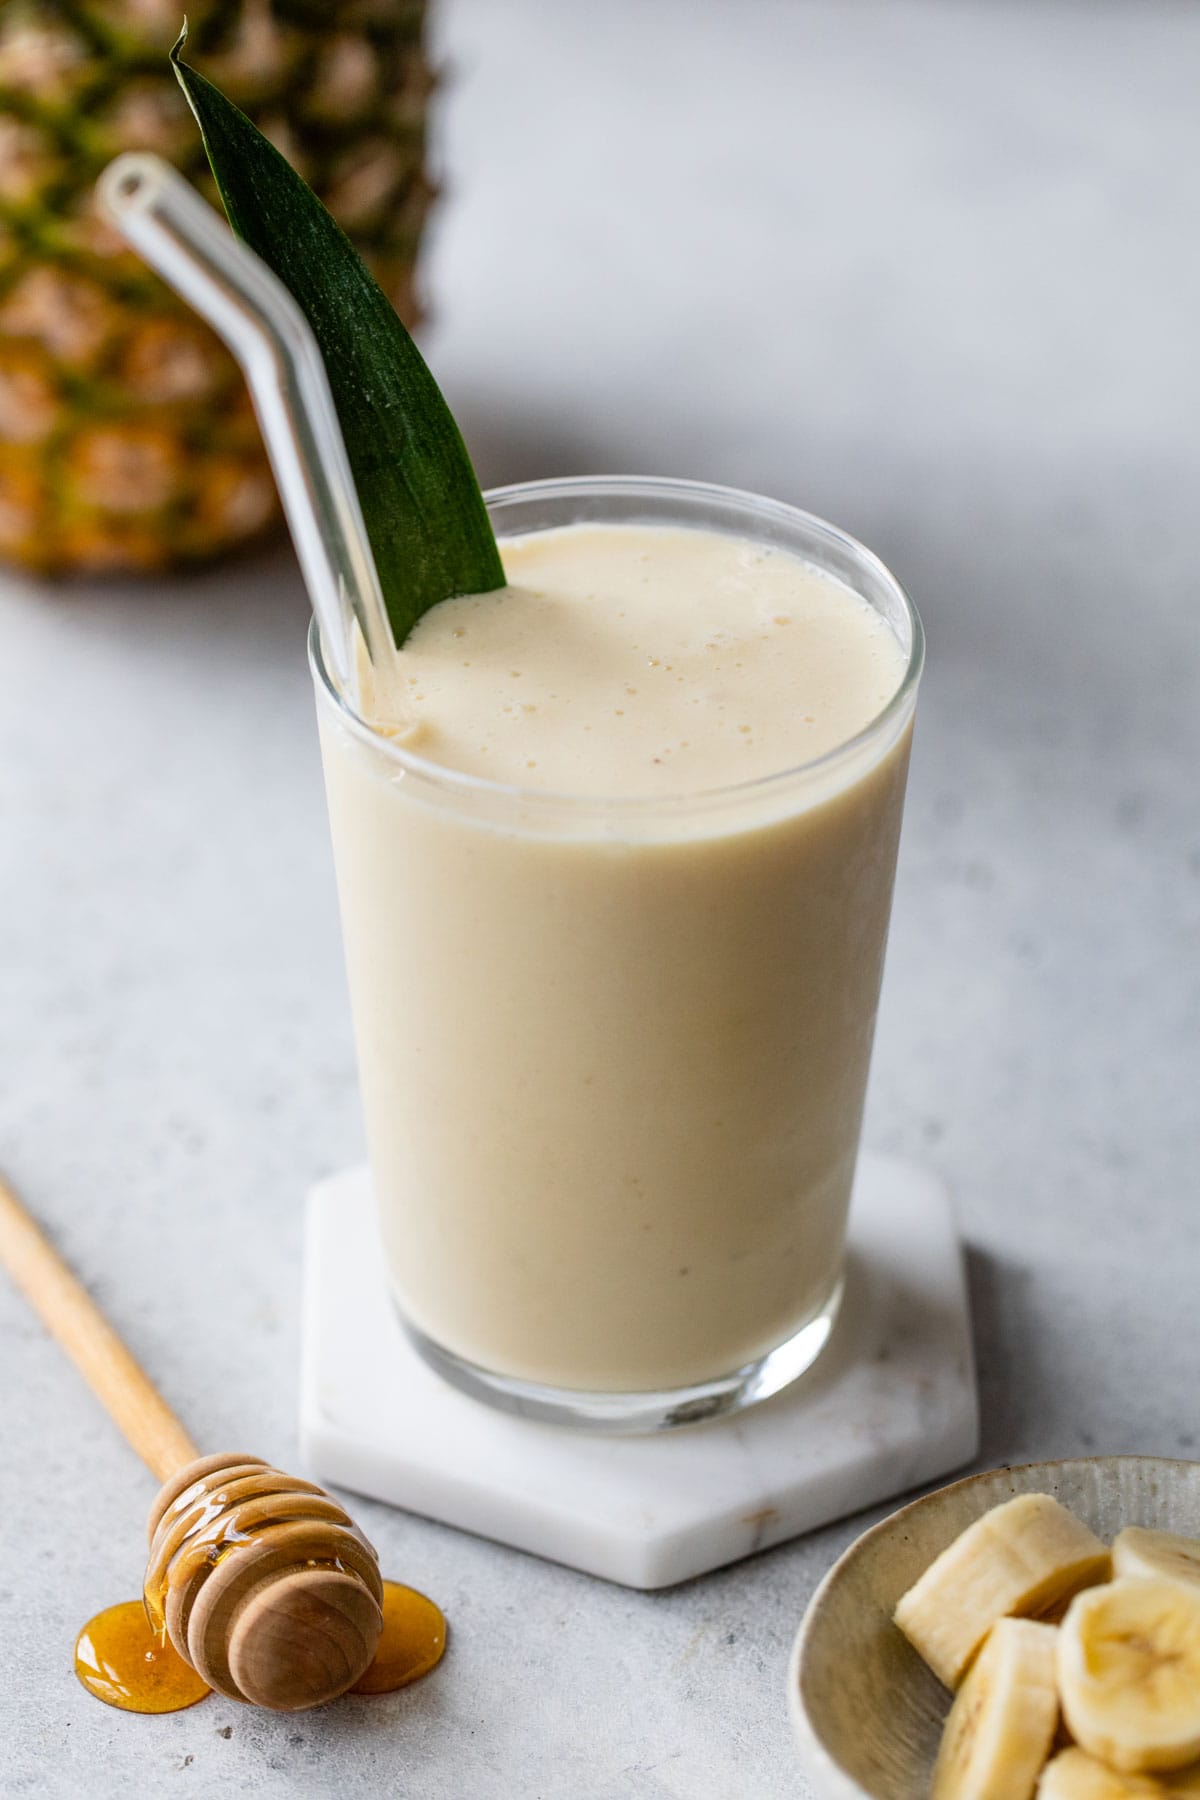 Refreshing Pineapple Smoothie: A Tropical Treat in Minutes